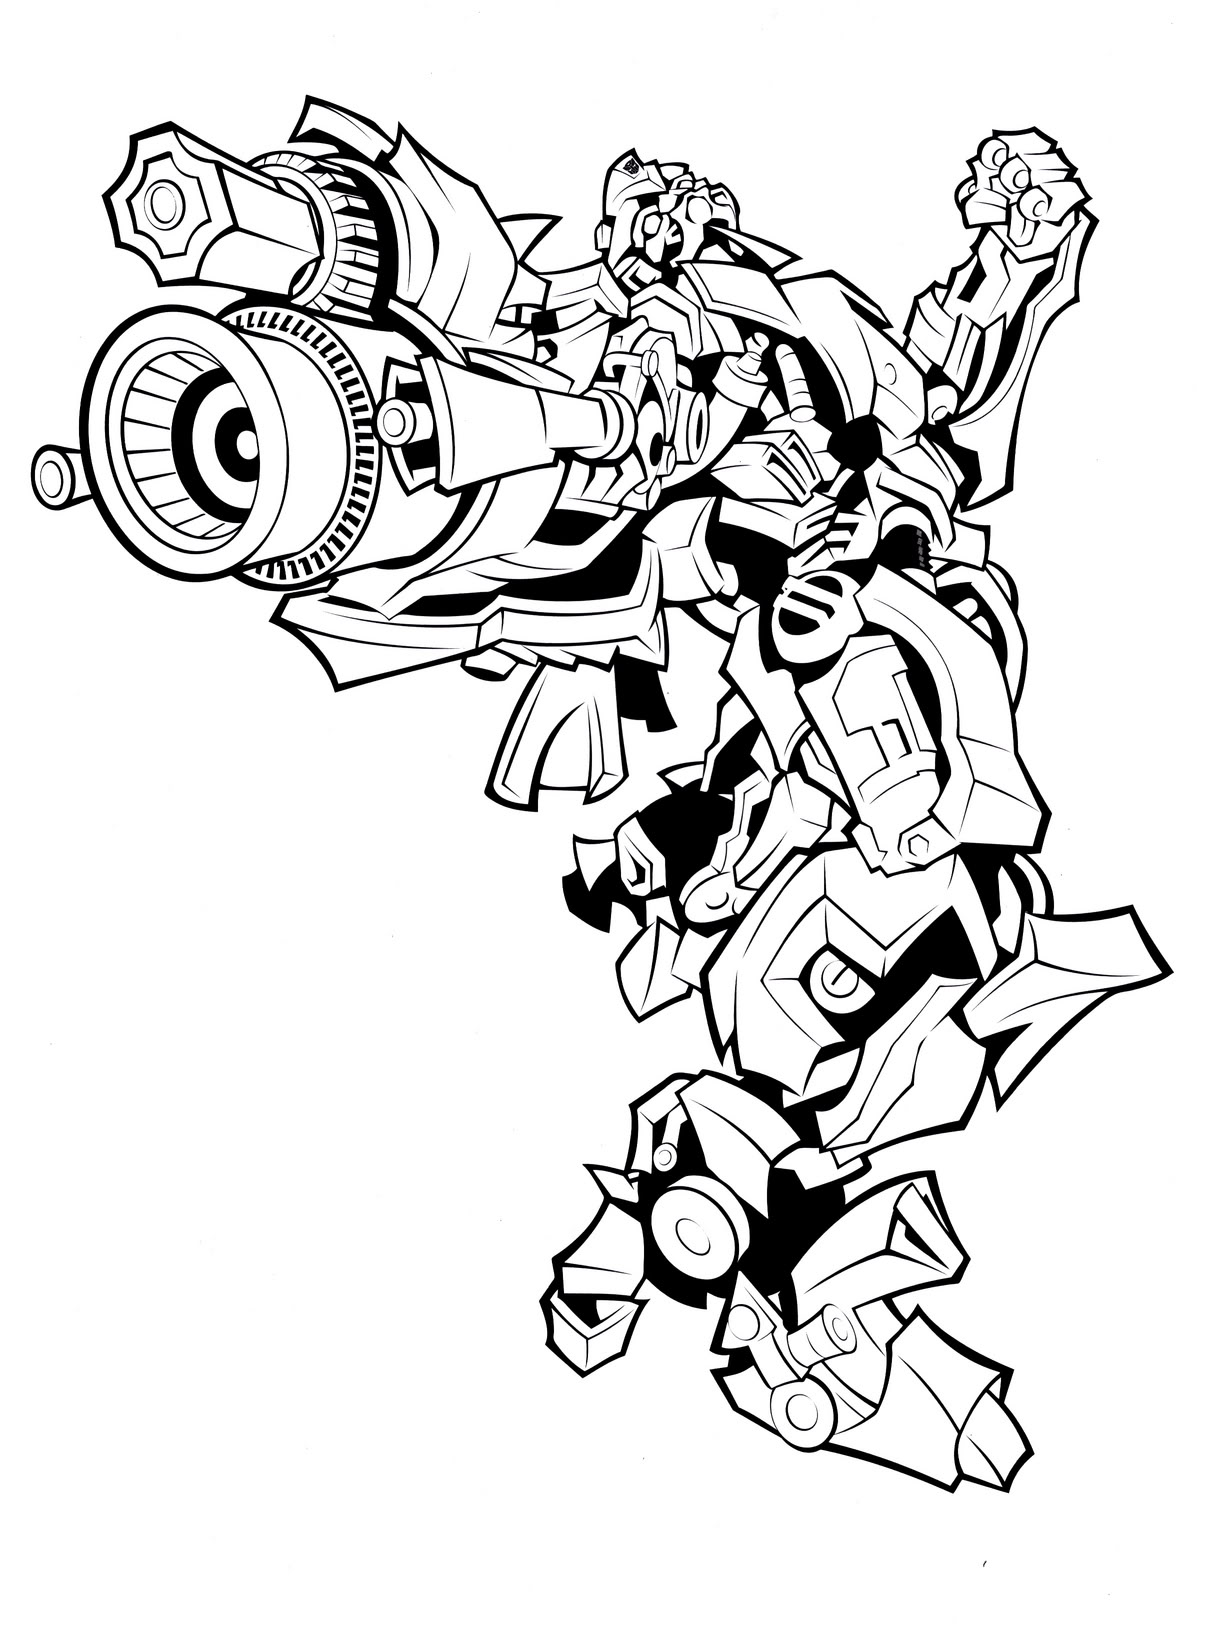 Transformers Coloring Pages Bumblebee | Azvoad